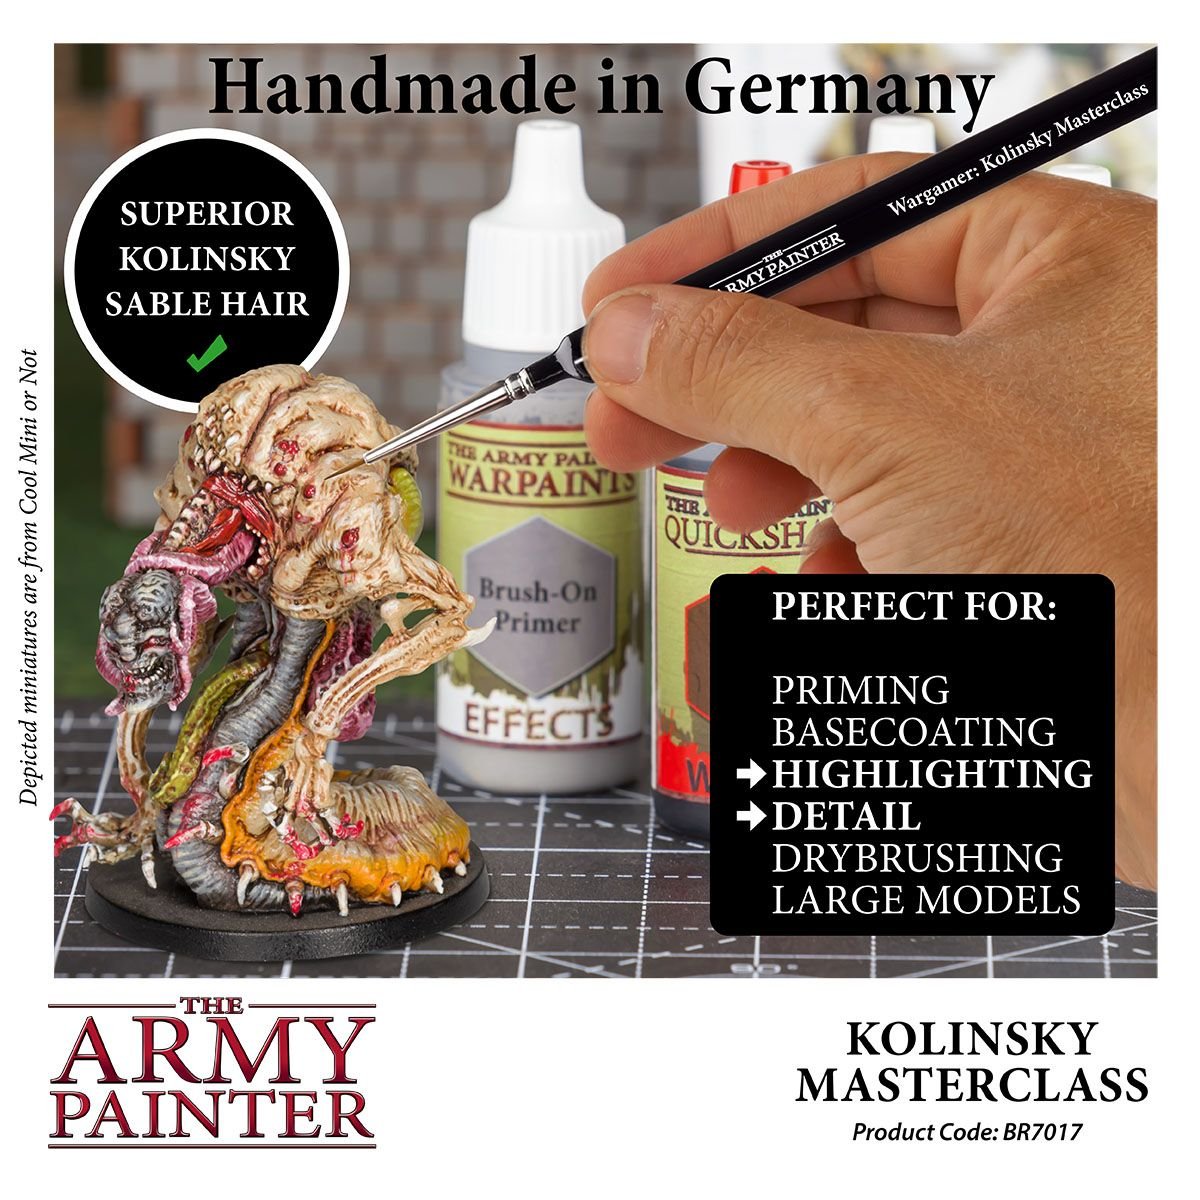 Army Painter Masterclass Drybrush Set For Painting Miniatures: How To Use 